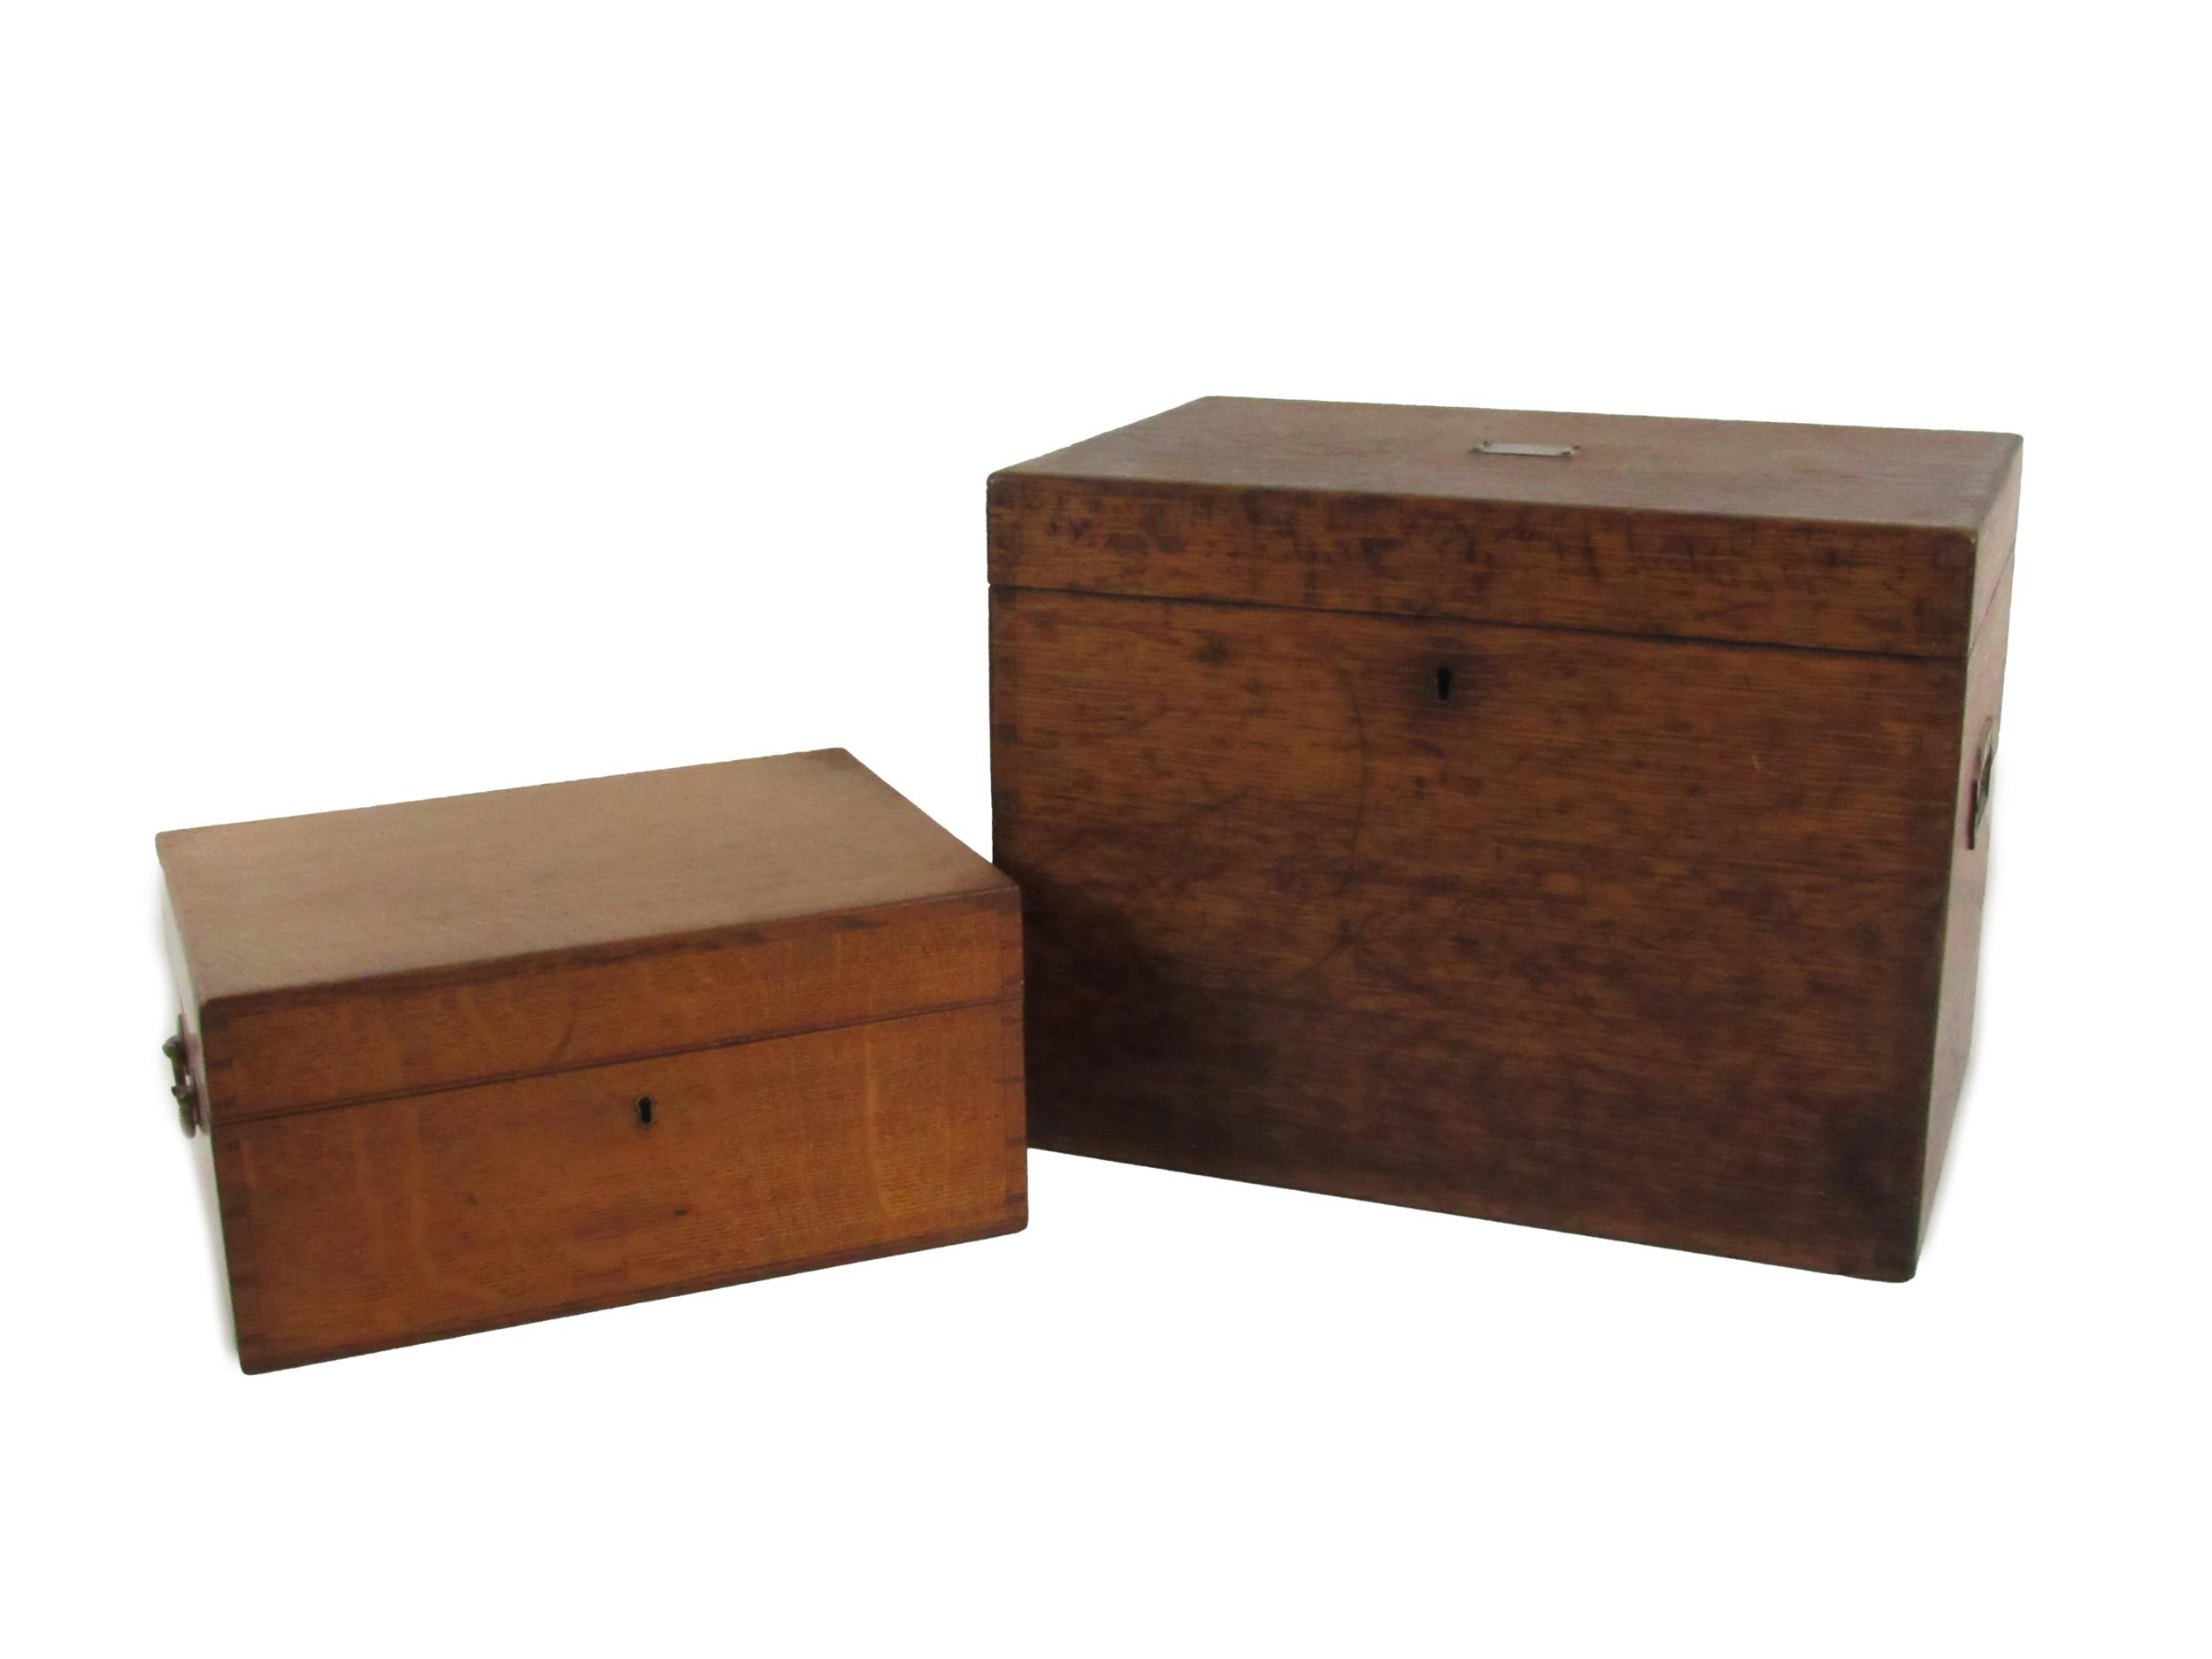 A large rectangular 19th Century oak Box, with brass plaque and inset brass handles, v. good; and